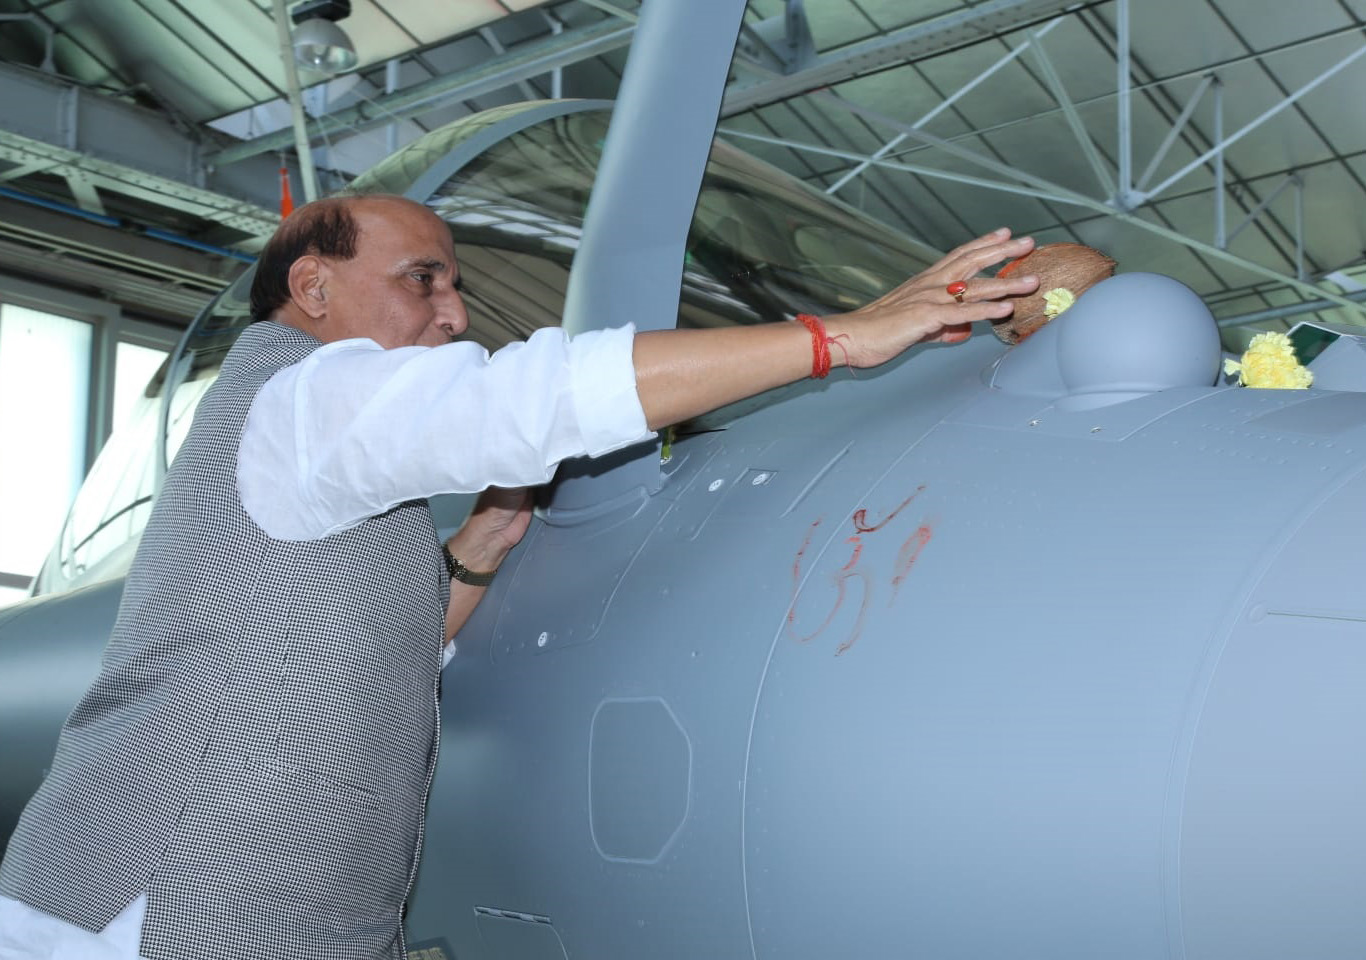 The_Union_Minister_for_Defence%2C_Shri_Rajnath_Singh_performing_a_%E2%80%98Shastra_puja%E2%80%99_on_Rafale_aircraft%2C_in_France_on_October_08%2C_2019_(2).jpg